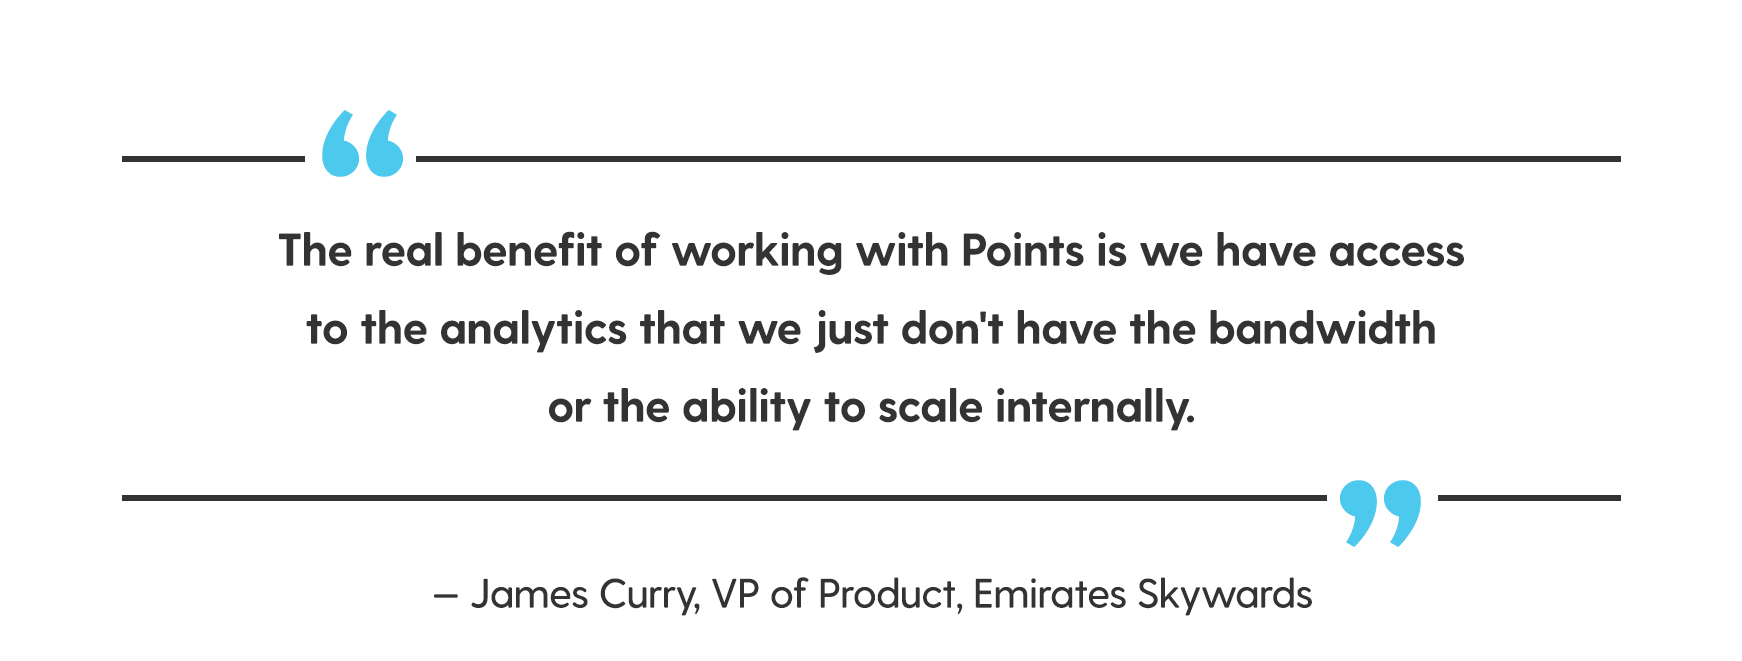 Quote from James Curry reads, The real benefit of working with Points is we have access to the analytics that we just don't have the bandwidth or the ability to scale internally.